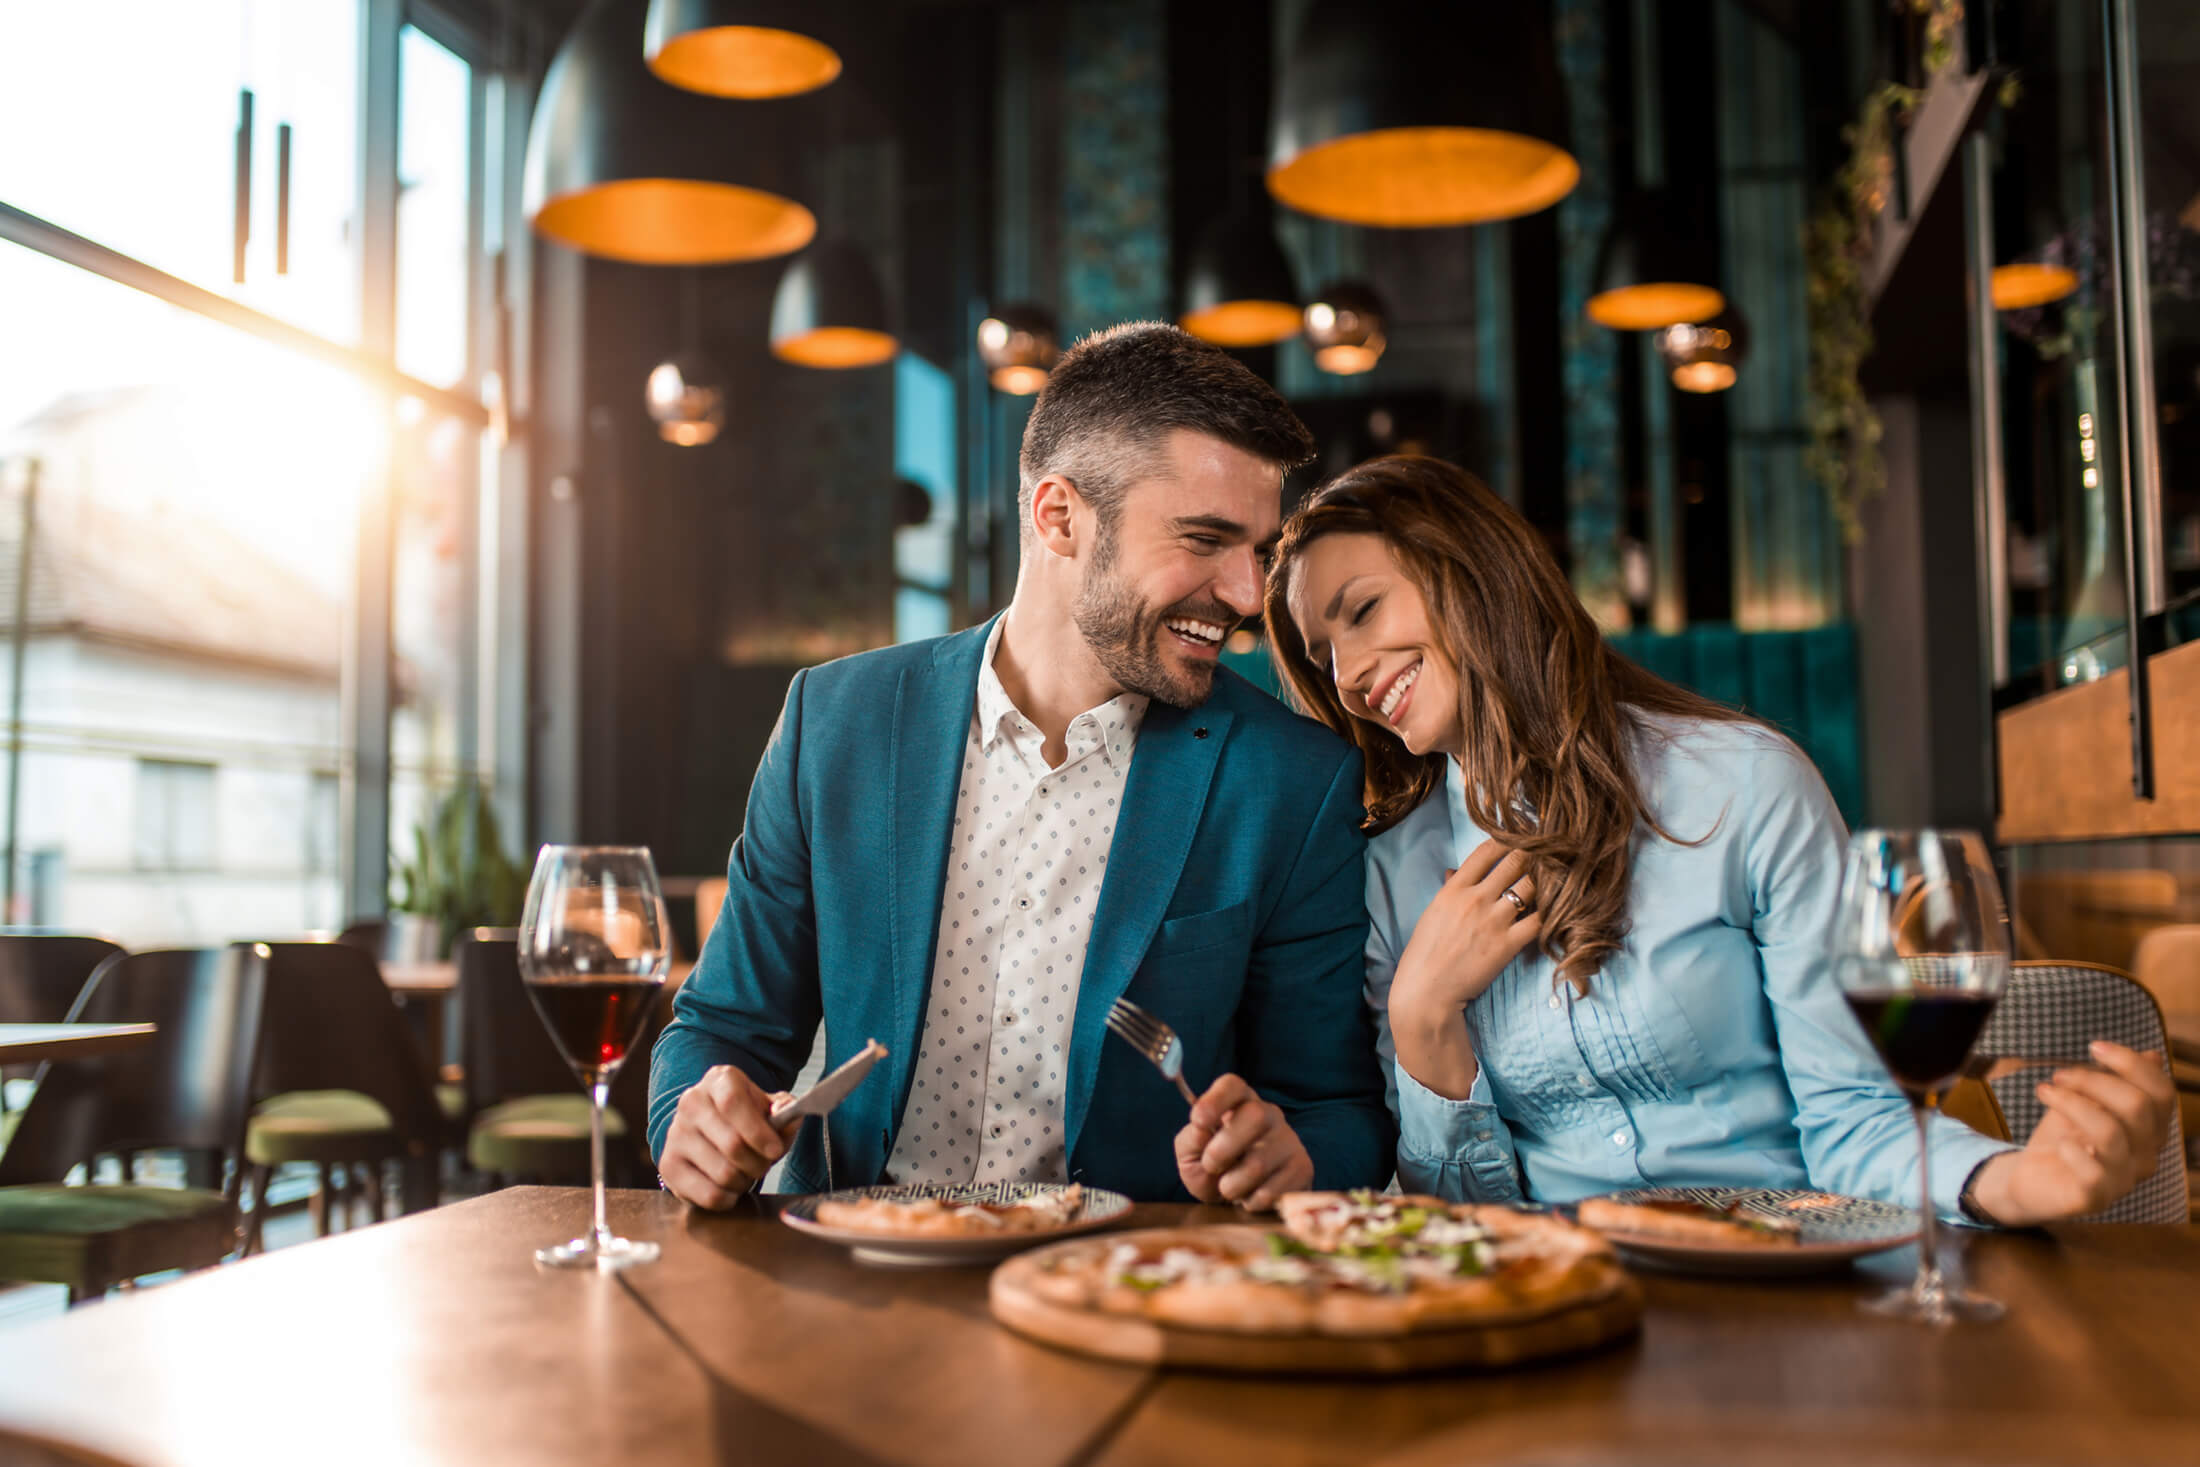 a couple enjoying pizza an in upscale dining setting